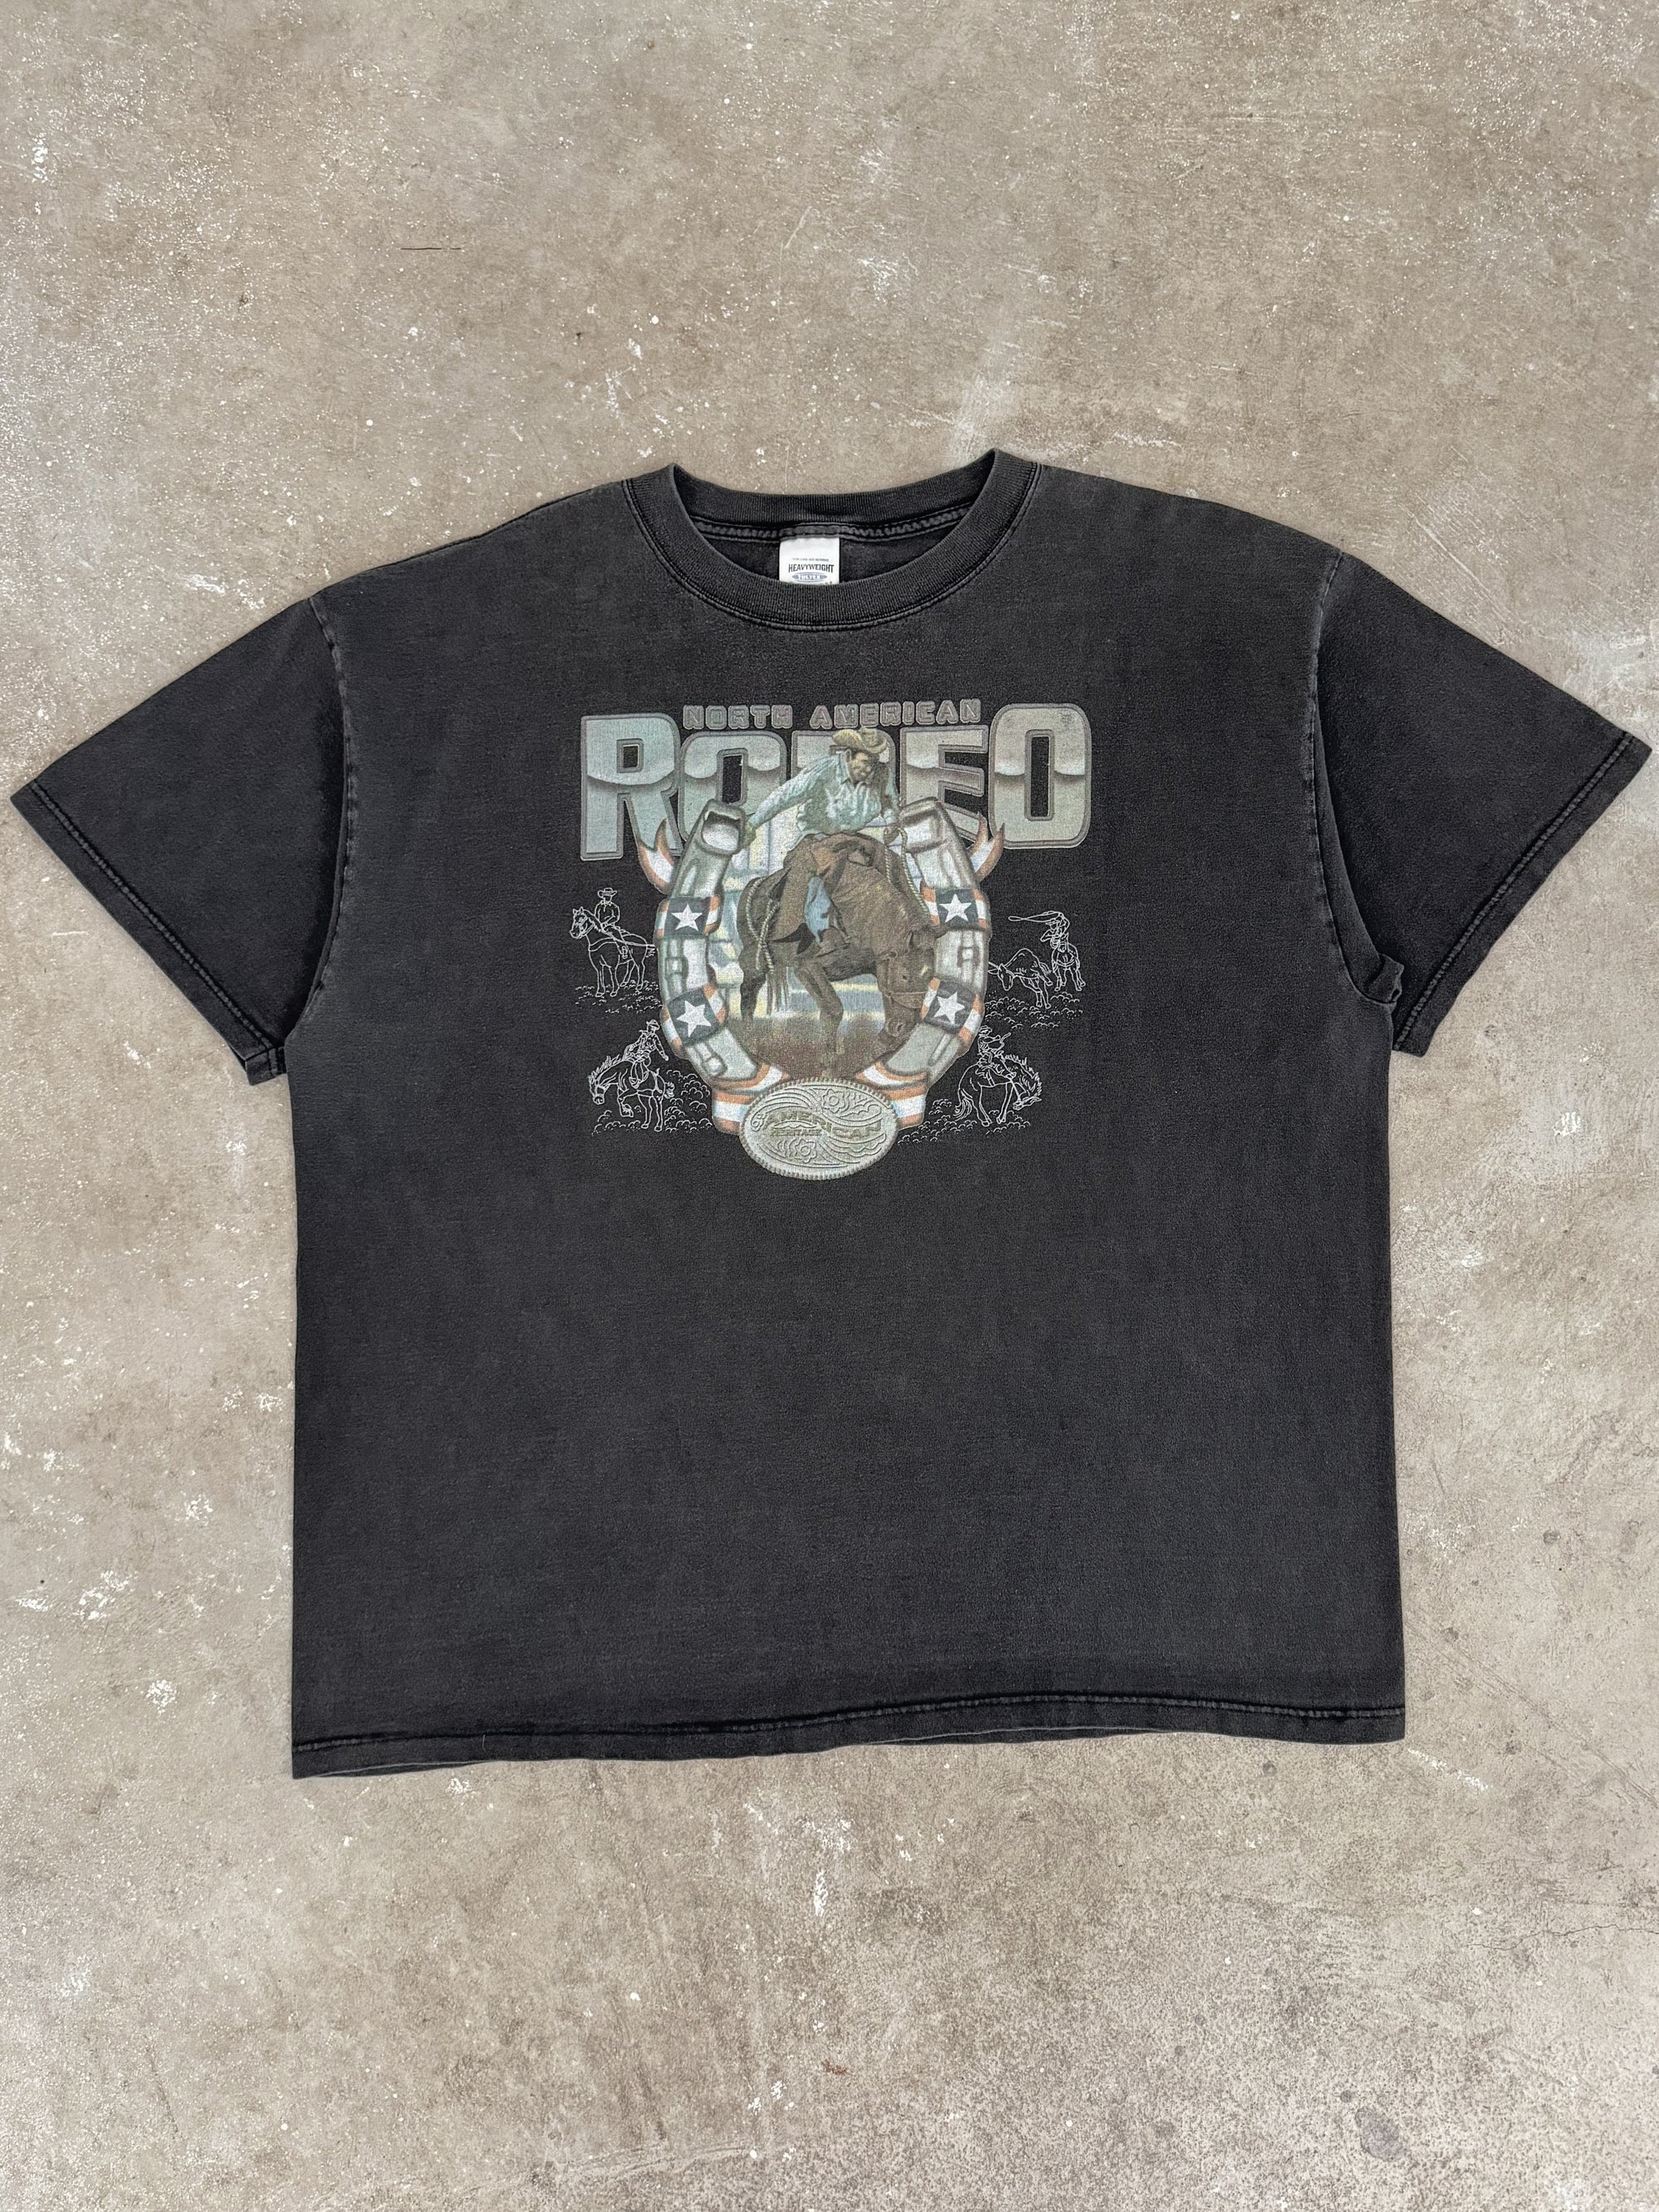 1990s/00s "North American Rodeo" Tee (XXL)